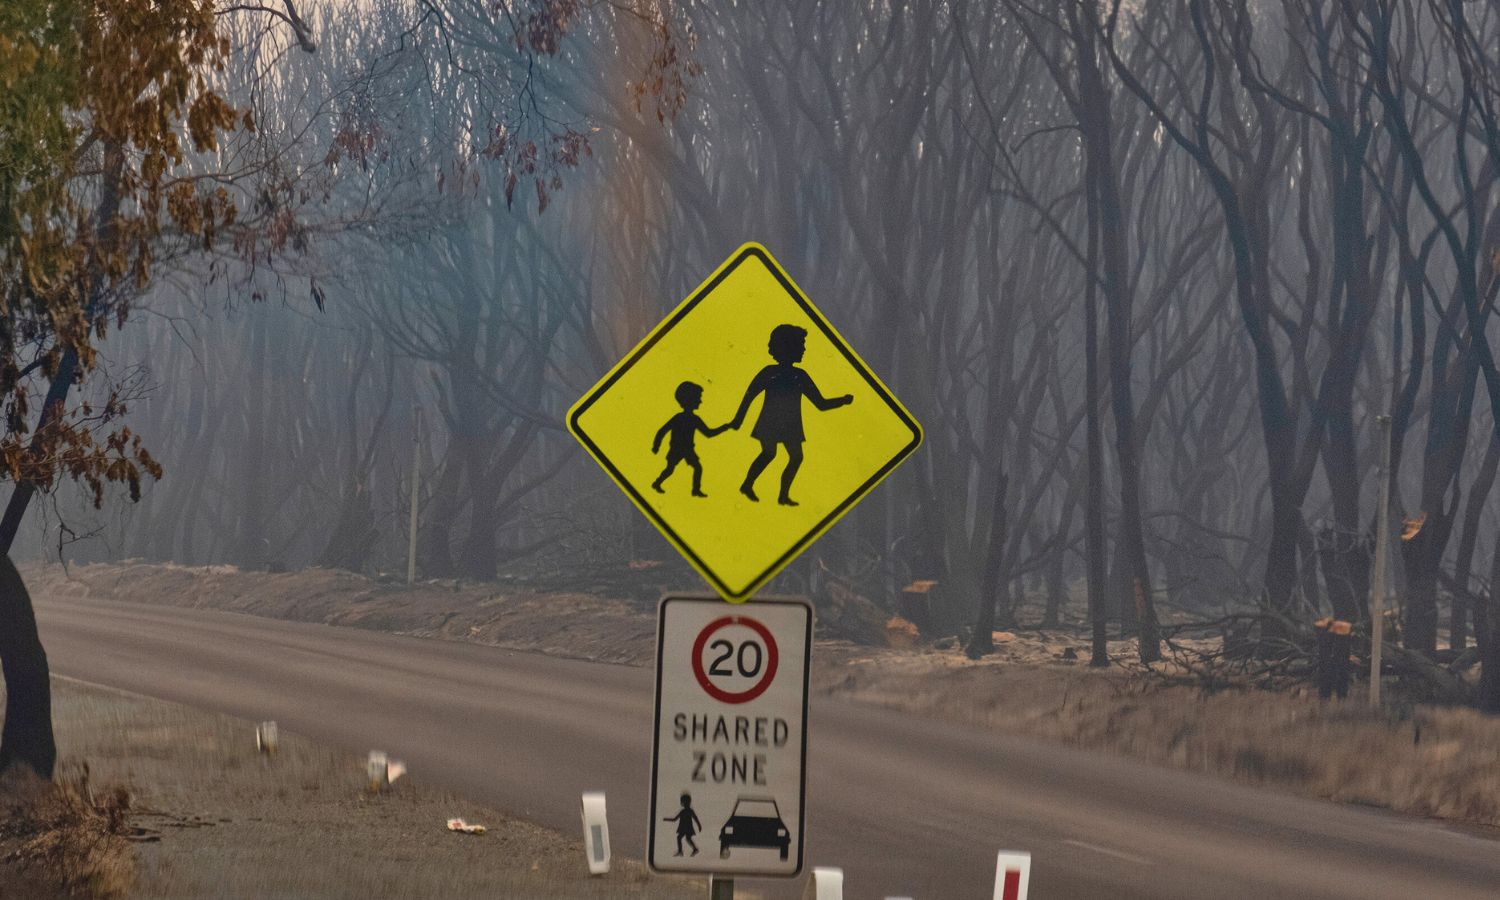 An image showing the aftermath of the fires in Australia to illustrate an article n duty of care climate bill.